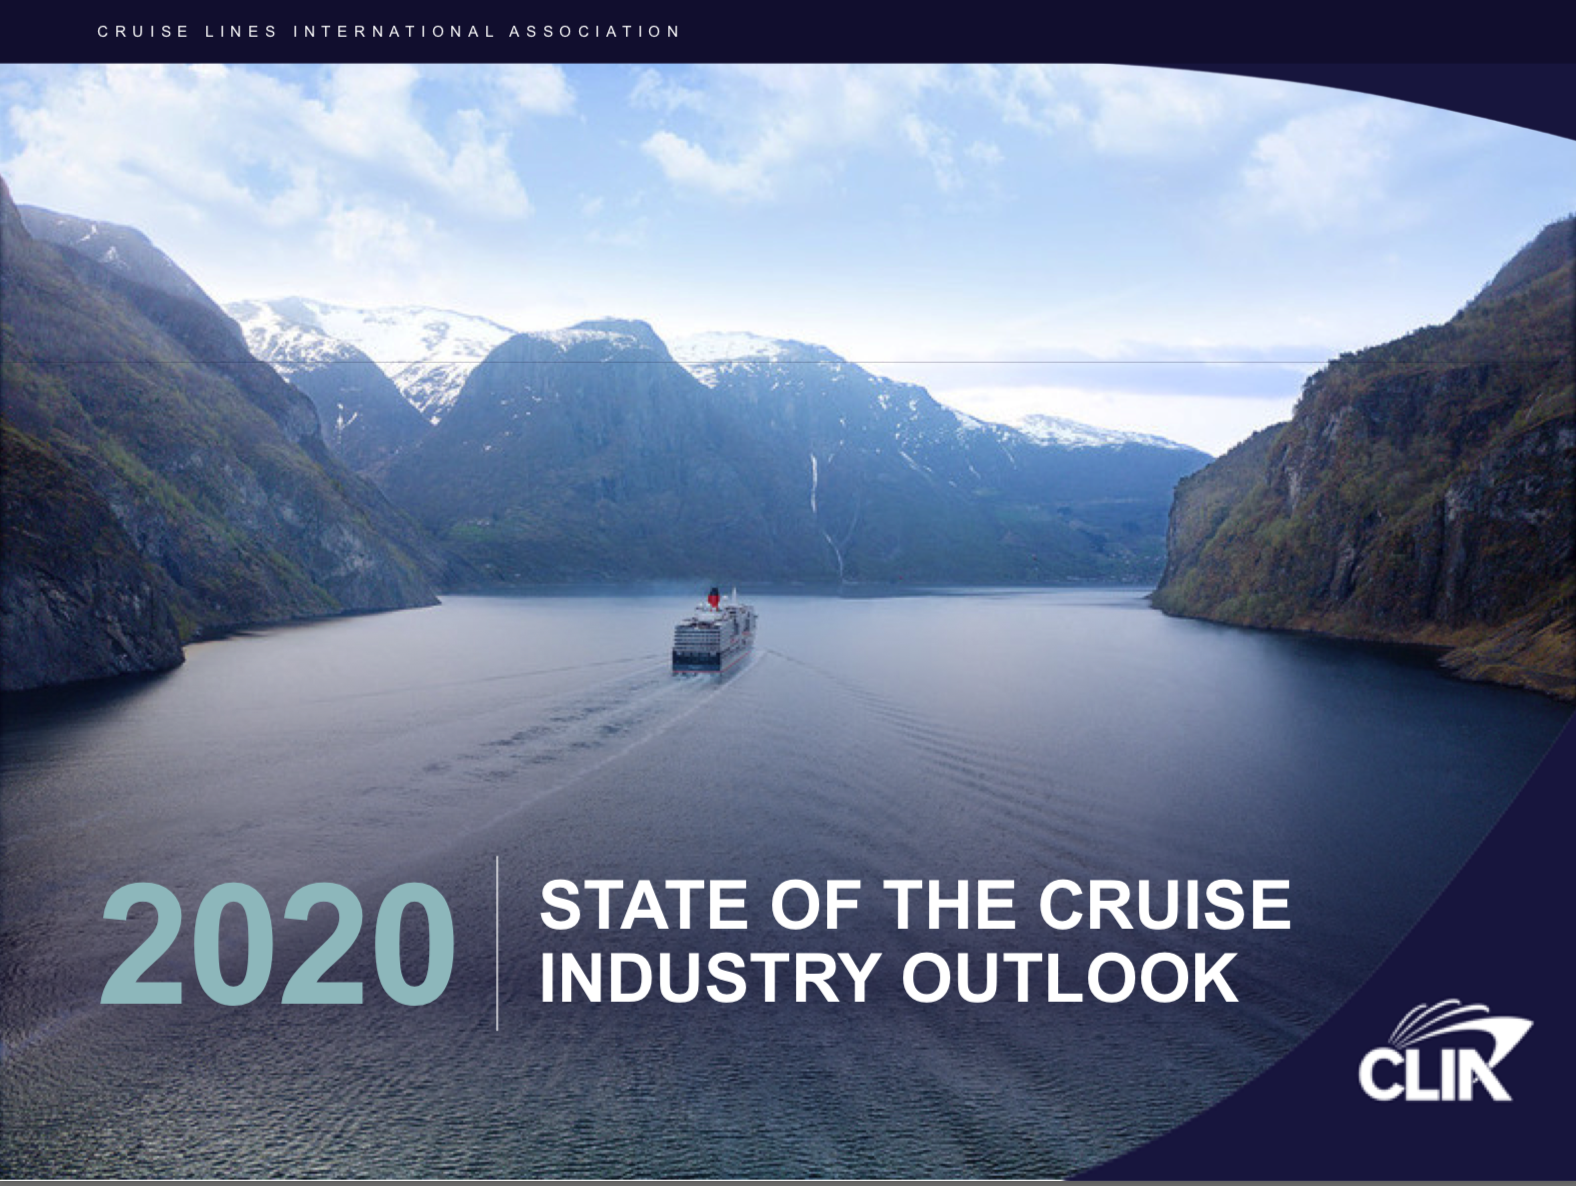 State of the Cruise Industry Outlook 2020